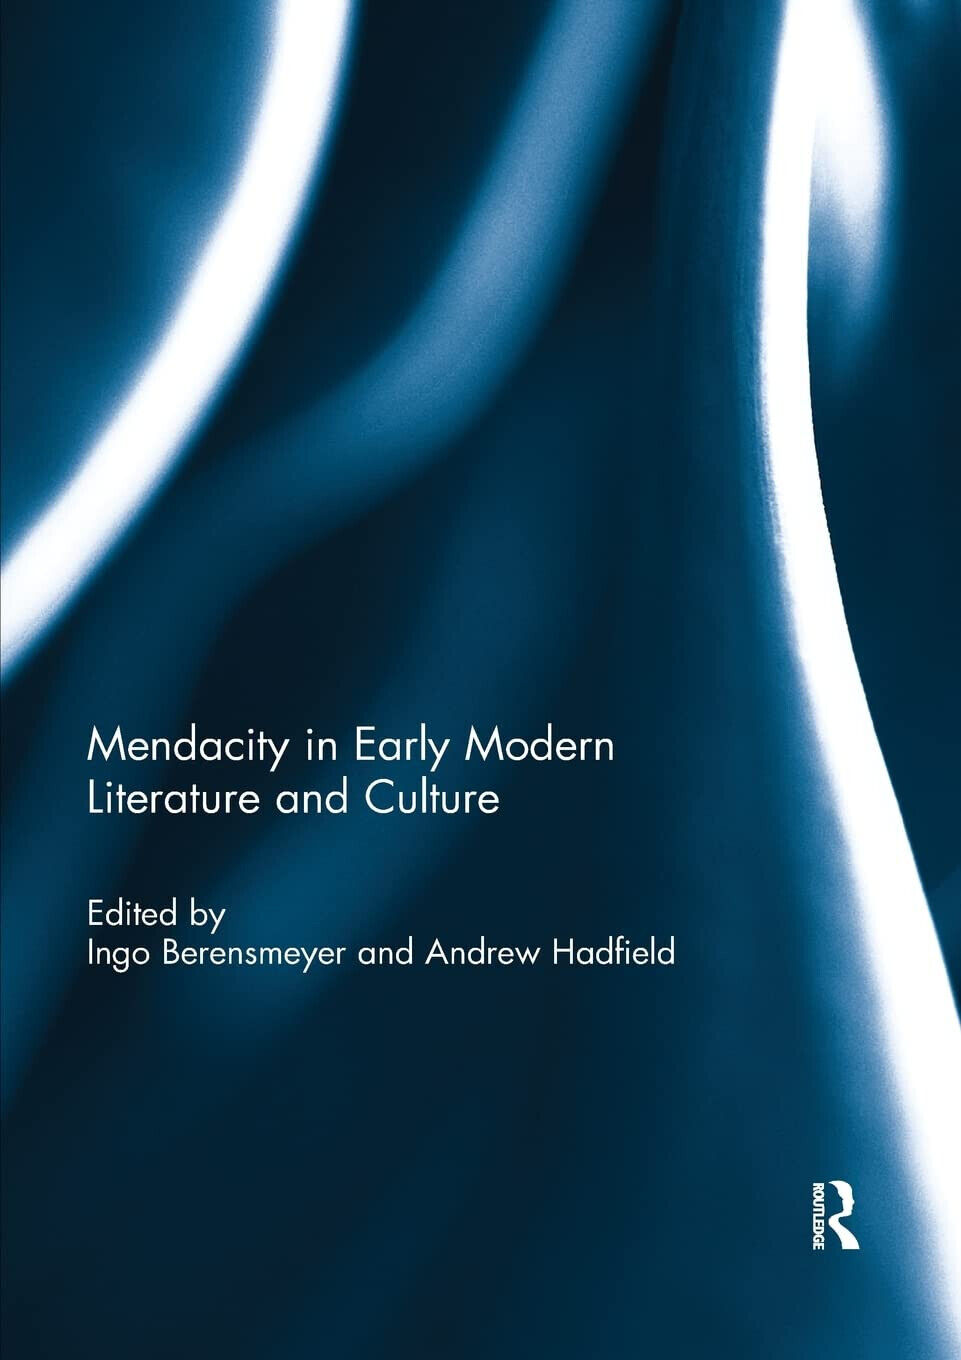 Mendacity in Early Modern Literature and Culture - Ingo Berensmeyer - 2019